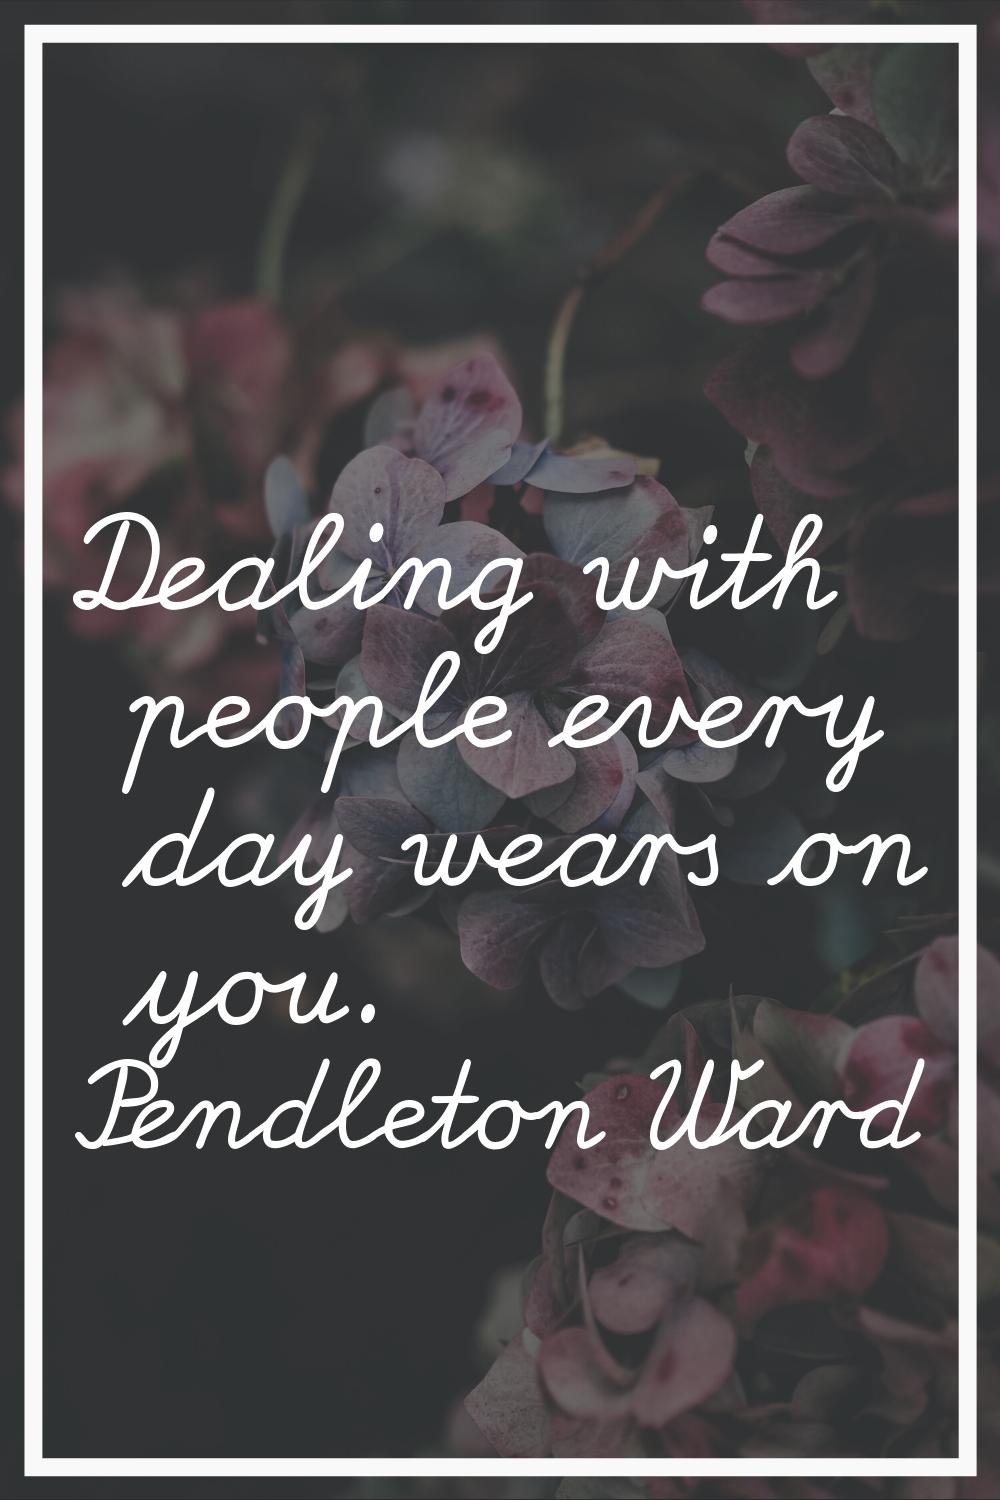 Dealing with people every day wears on you.